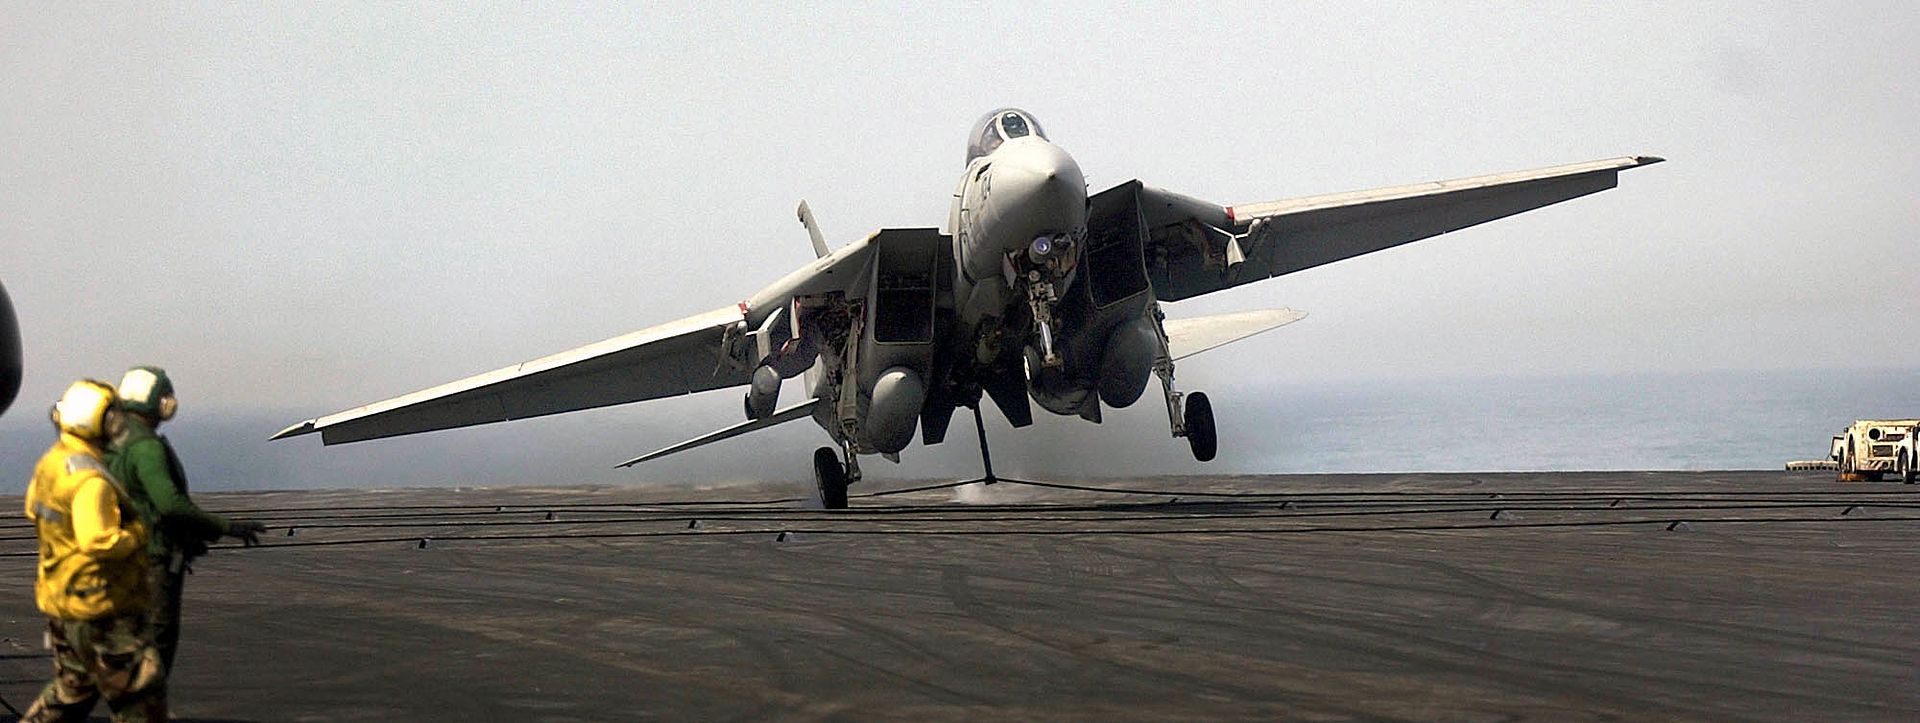 US_Navy_030415-N-4142G-106_An_F-14D_Tomcat_assigned_to_the_ldquoBounty_Huntersrdquo_of_Fighter_Squadron_Two_VF-2_makes_a_har_zps39024fb9.jpg